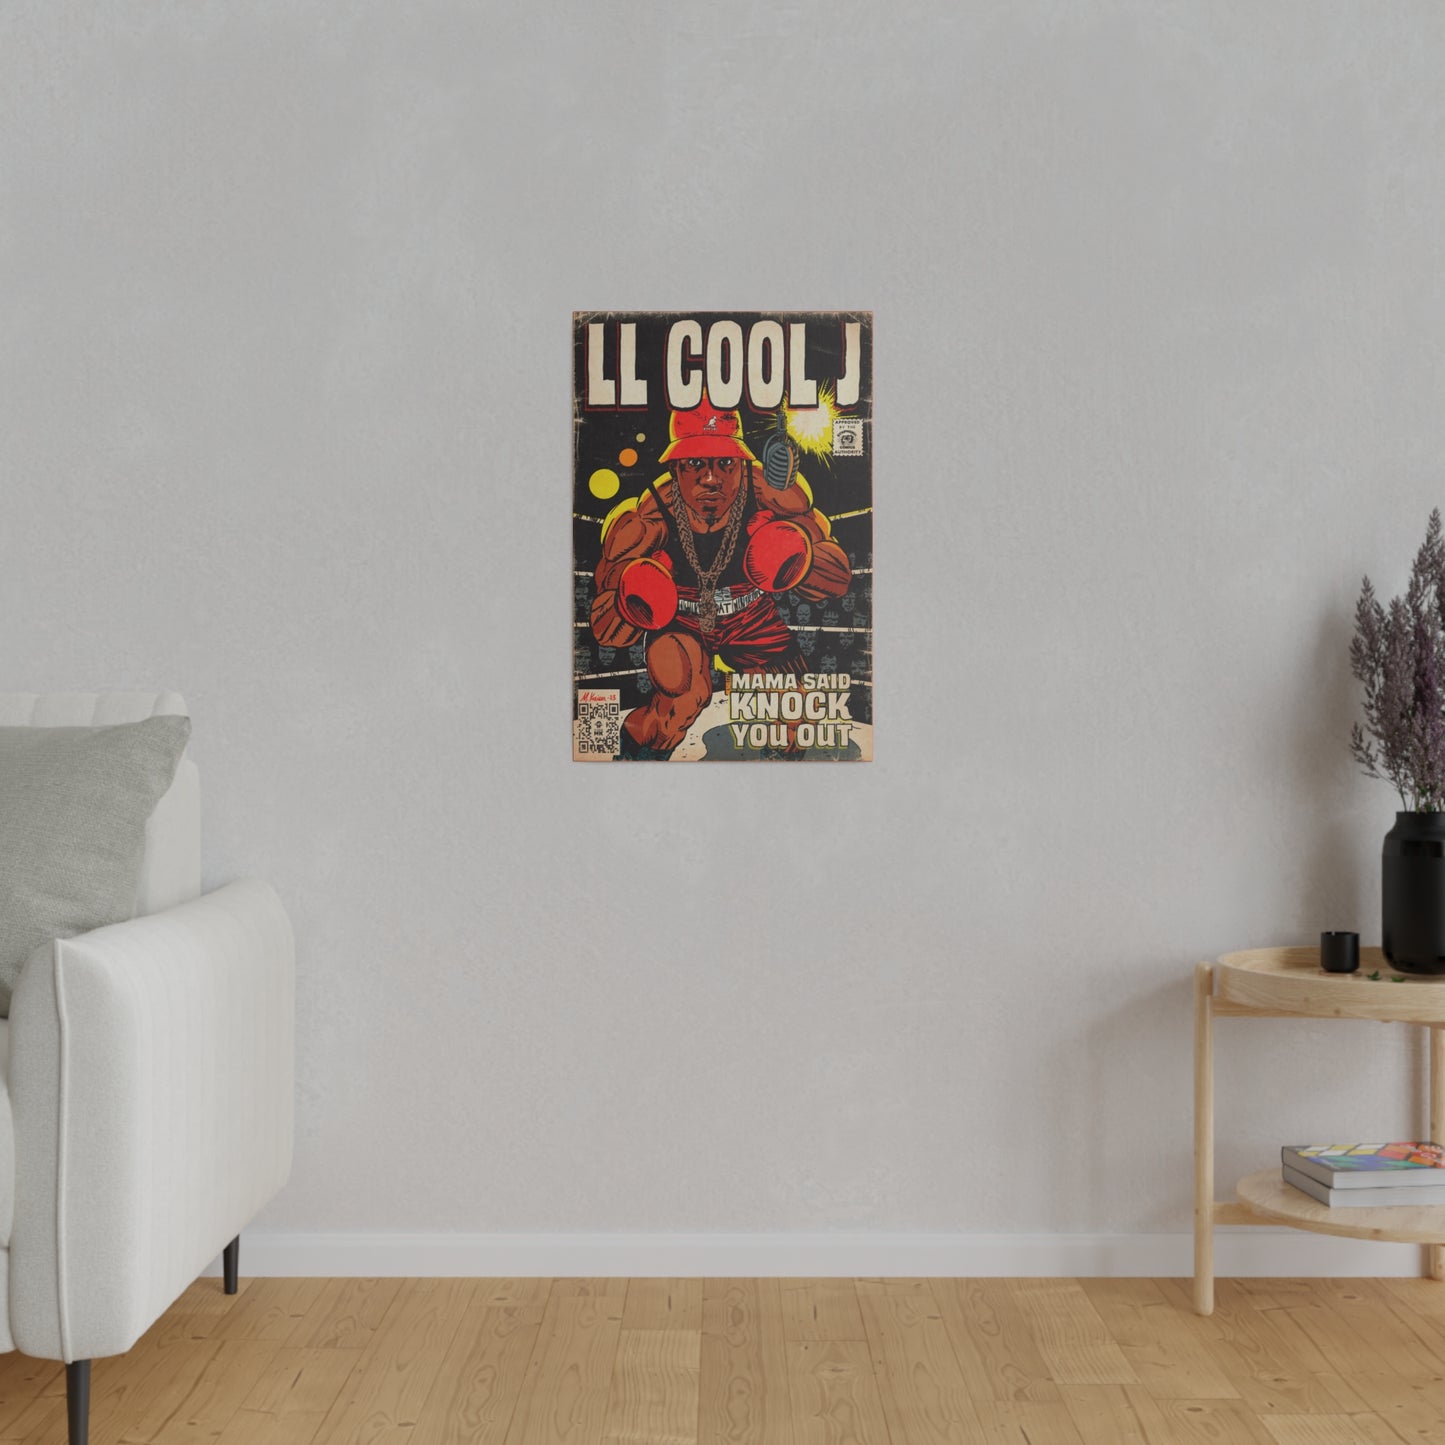 LL Cool J - Mama Said Knock You Out - Matte Canvas, Stretched, 0.75"